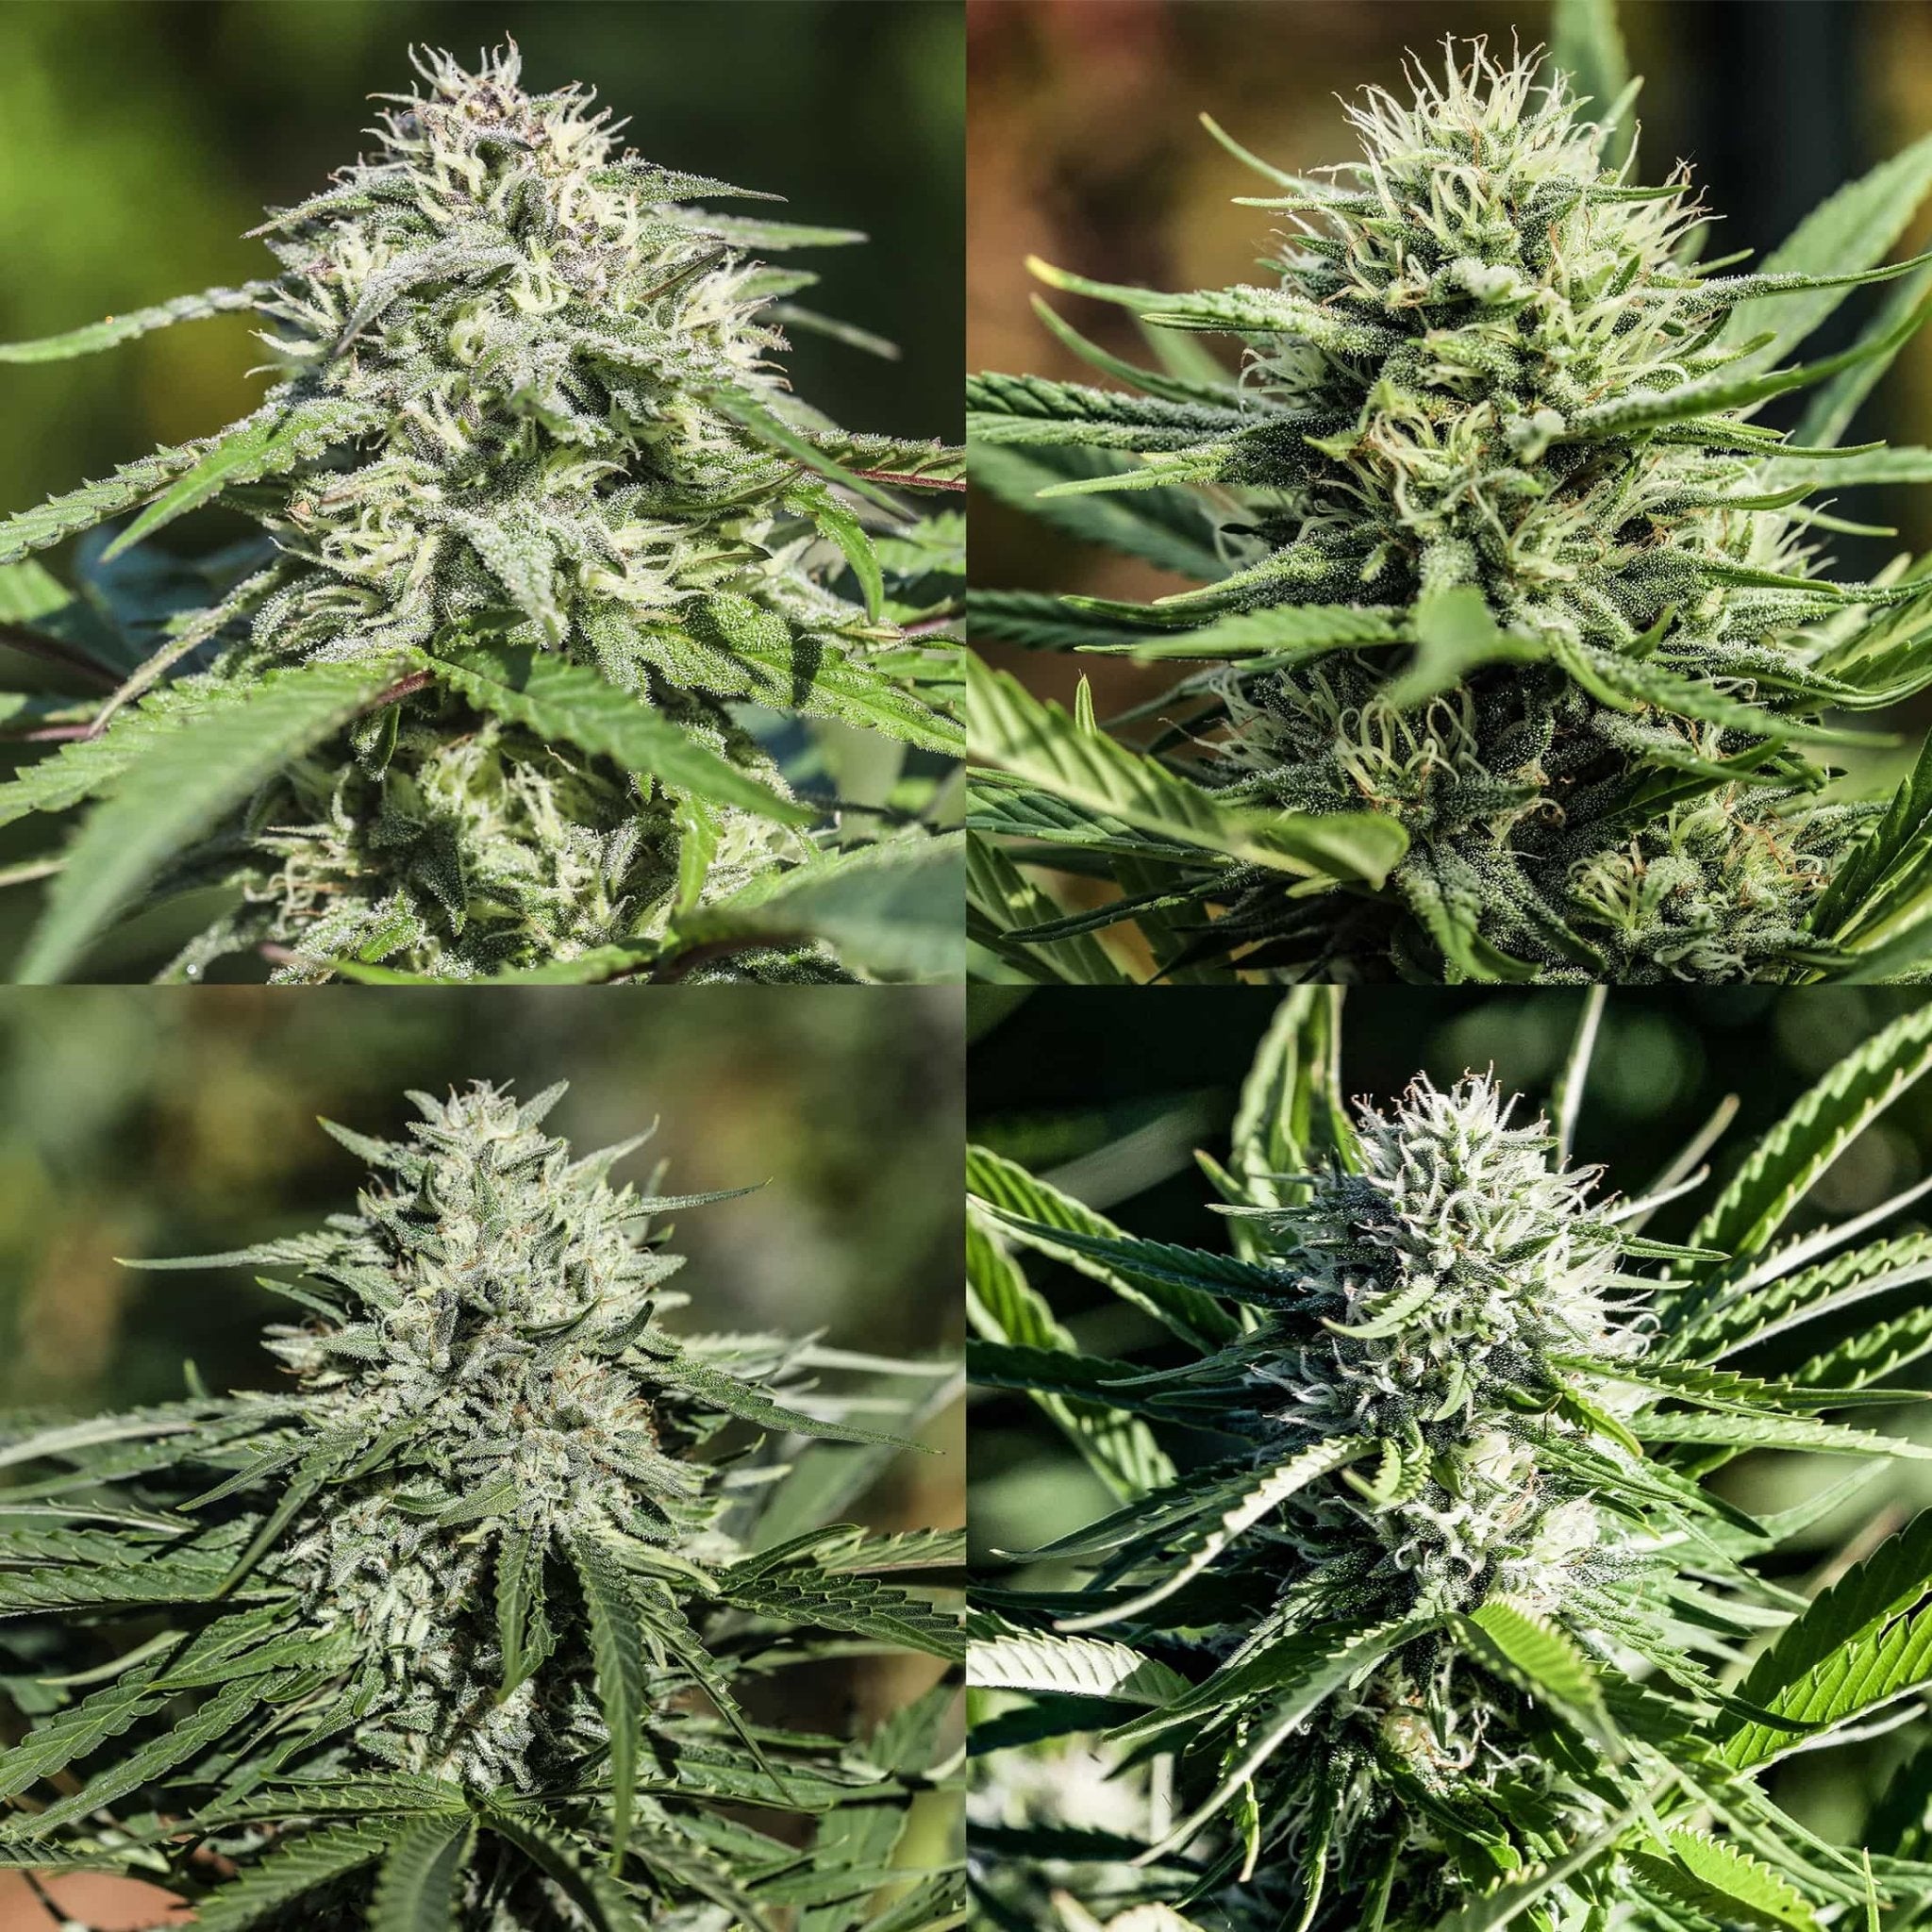 Green and purple flecked Cakeberry Brulee flower, a green with narrow leafed Sour Chem CBD flower, a green and frosty Sour Brulee flower, and a large and bulbous Sour Brulee flower. All flowers were grown from high cbds seeds outdoors at GTR.